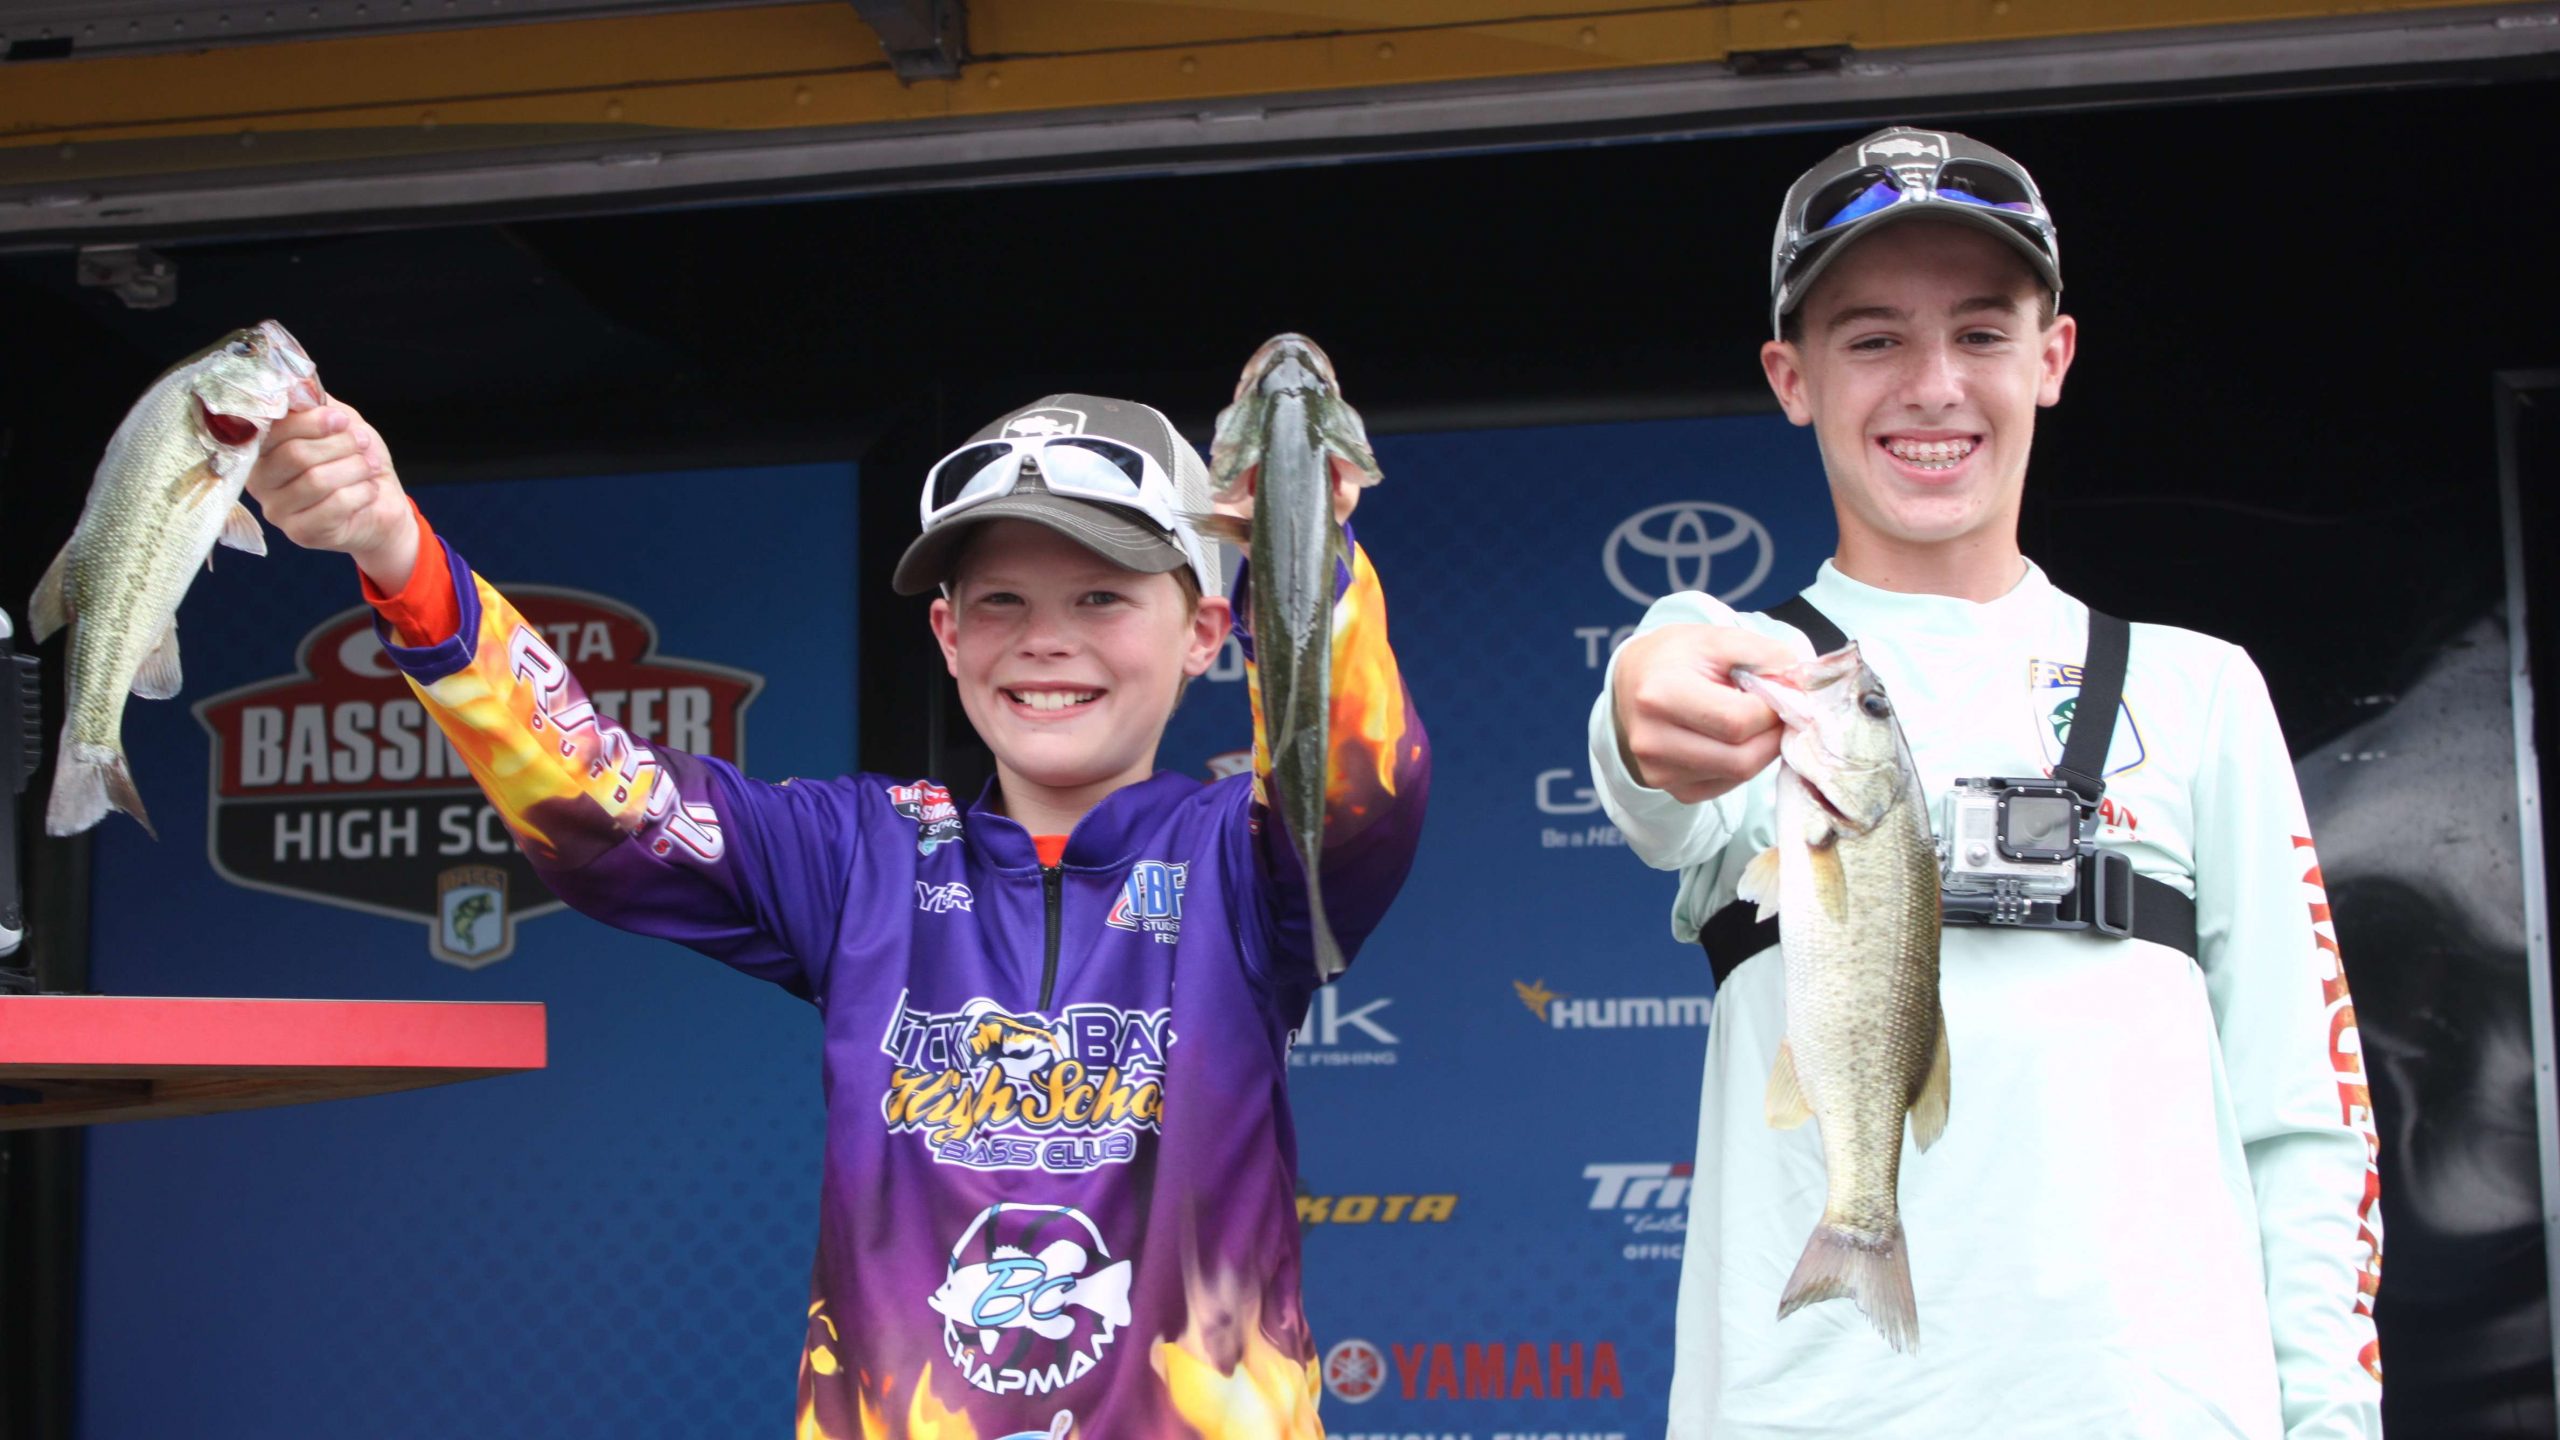 Ryder Mains and Daniel Gugesell have Team Kansas in 18th place with three fish for 2-6.